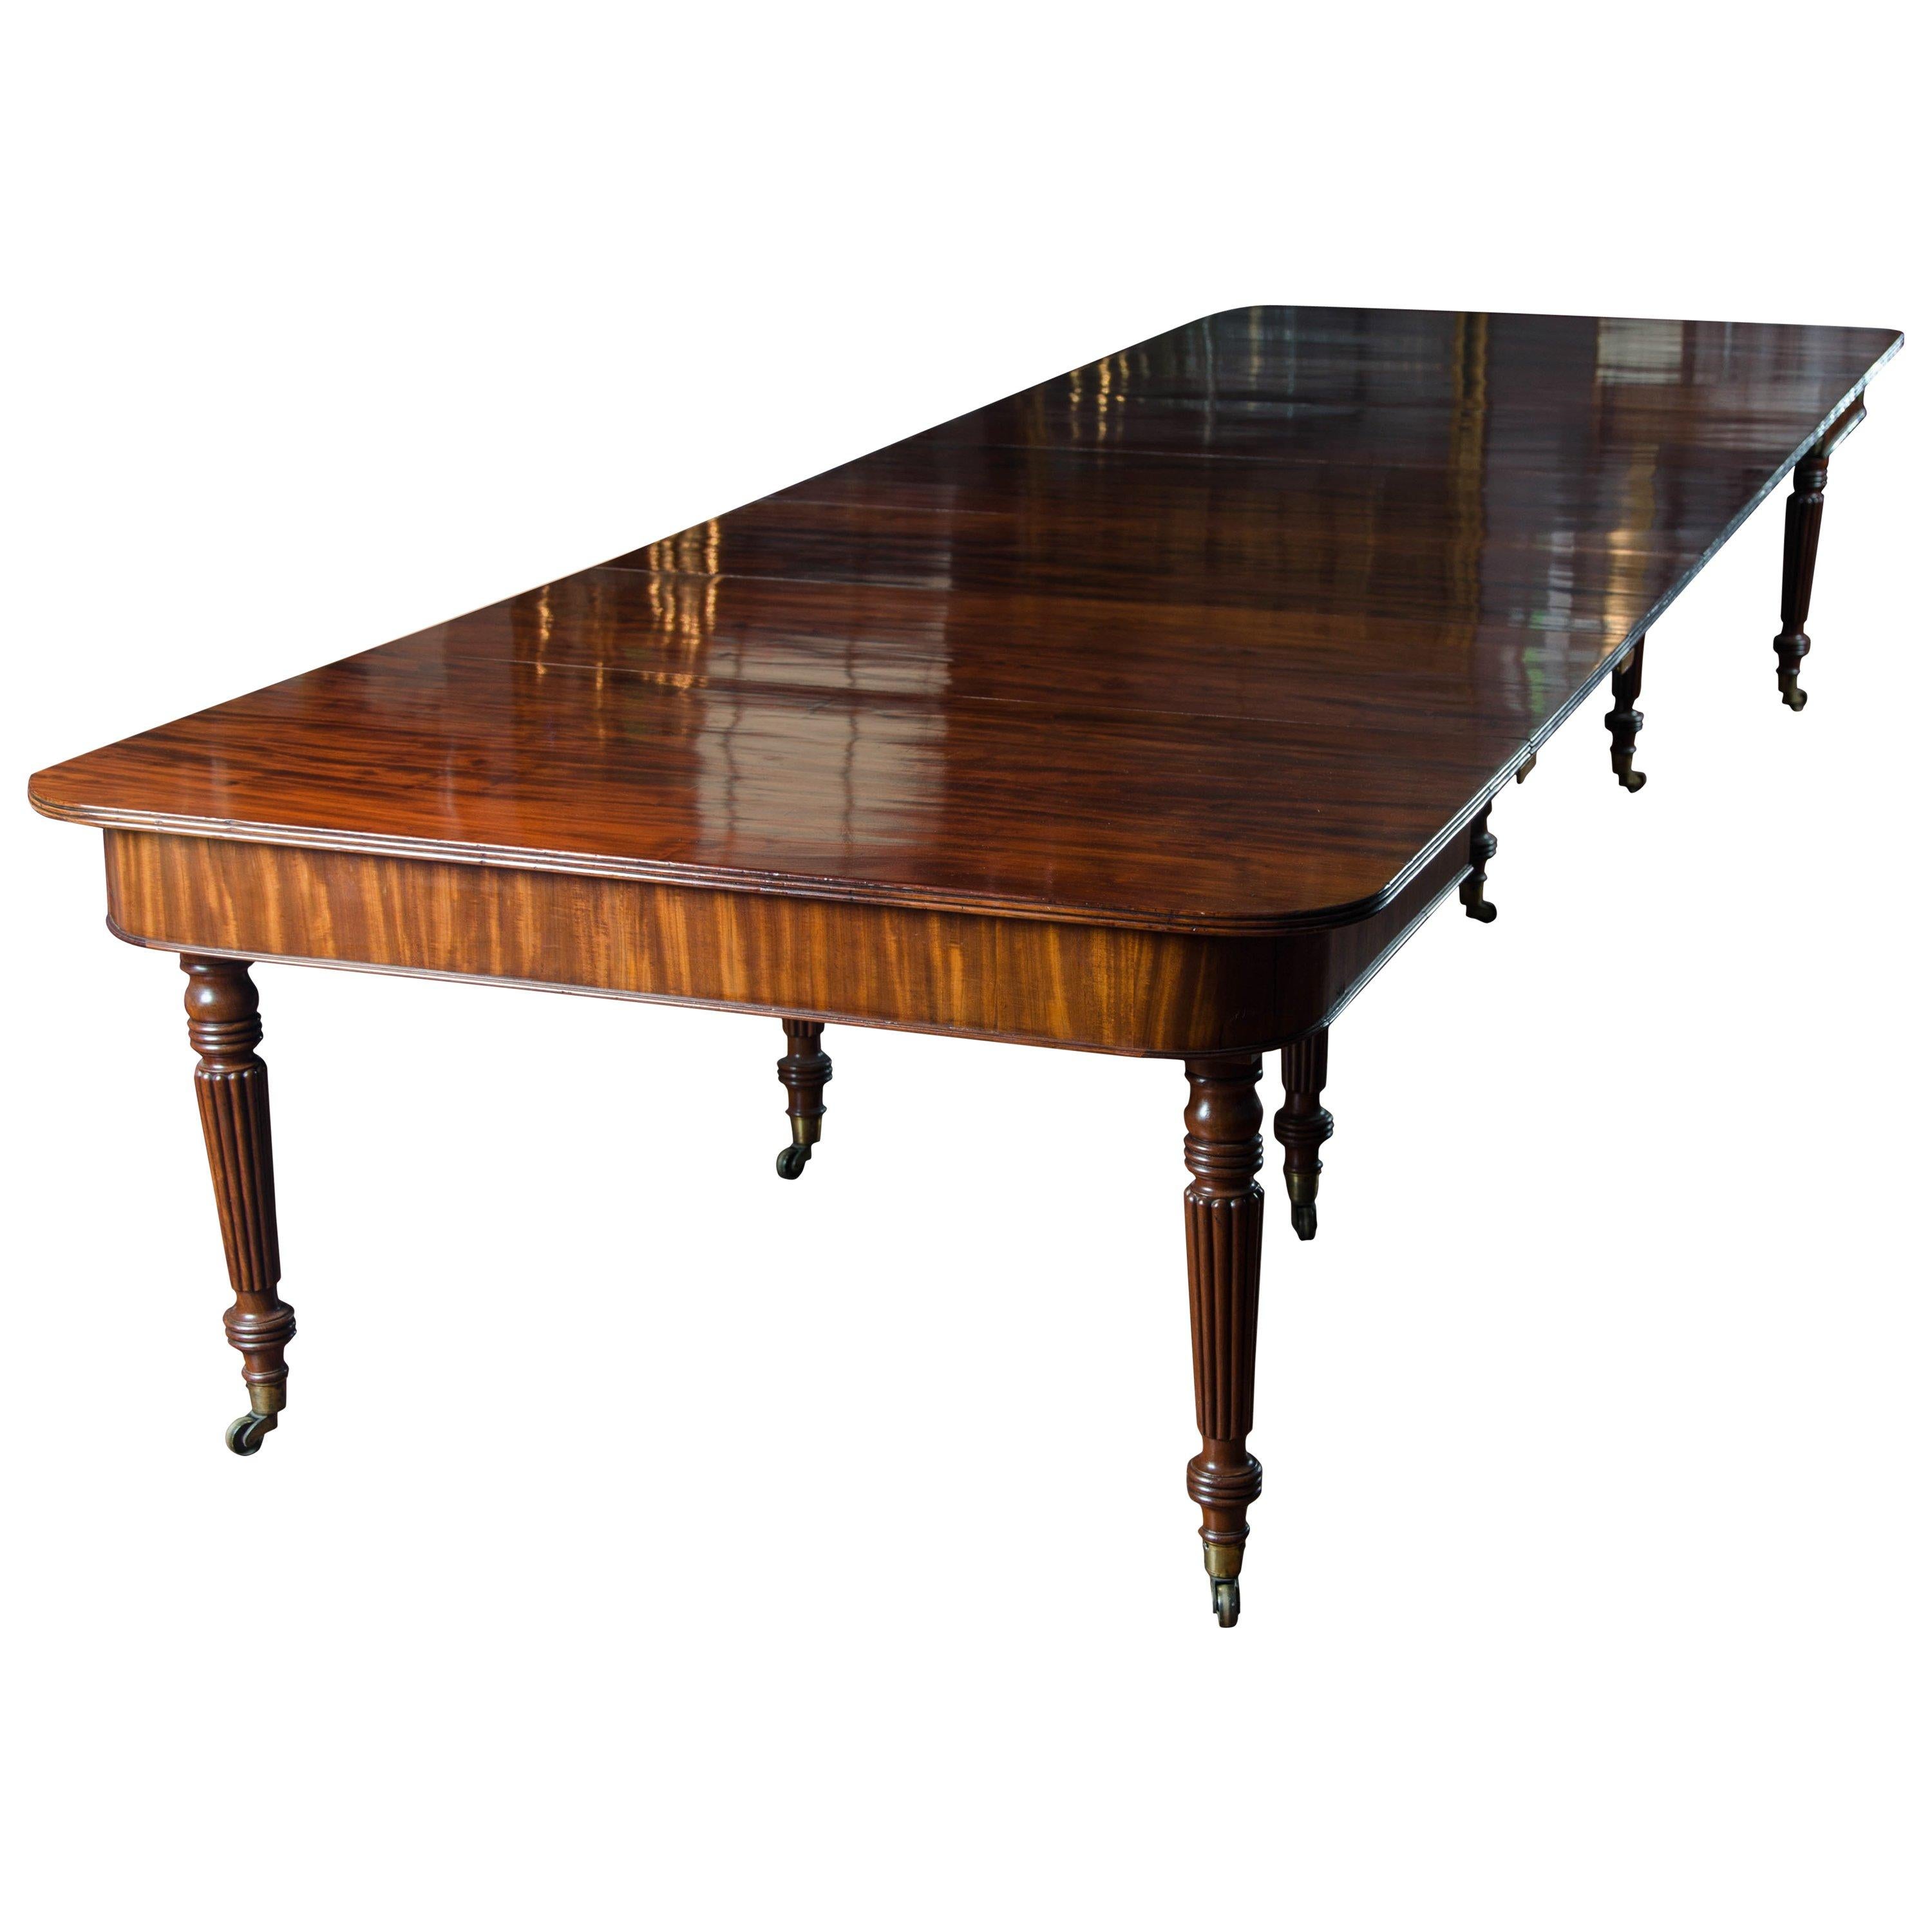 Regency period mahogany extending dining table attributed to Gillows For Sale